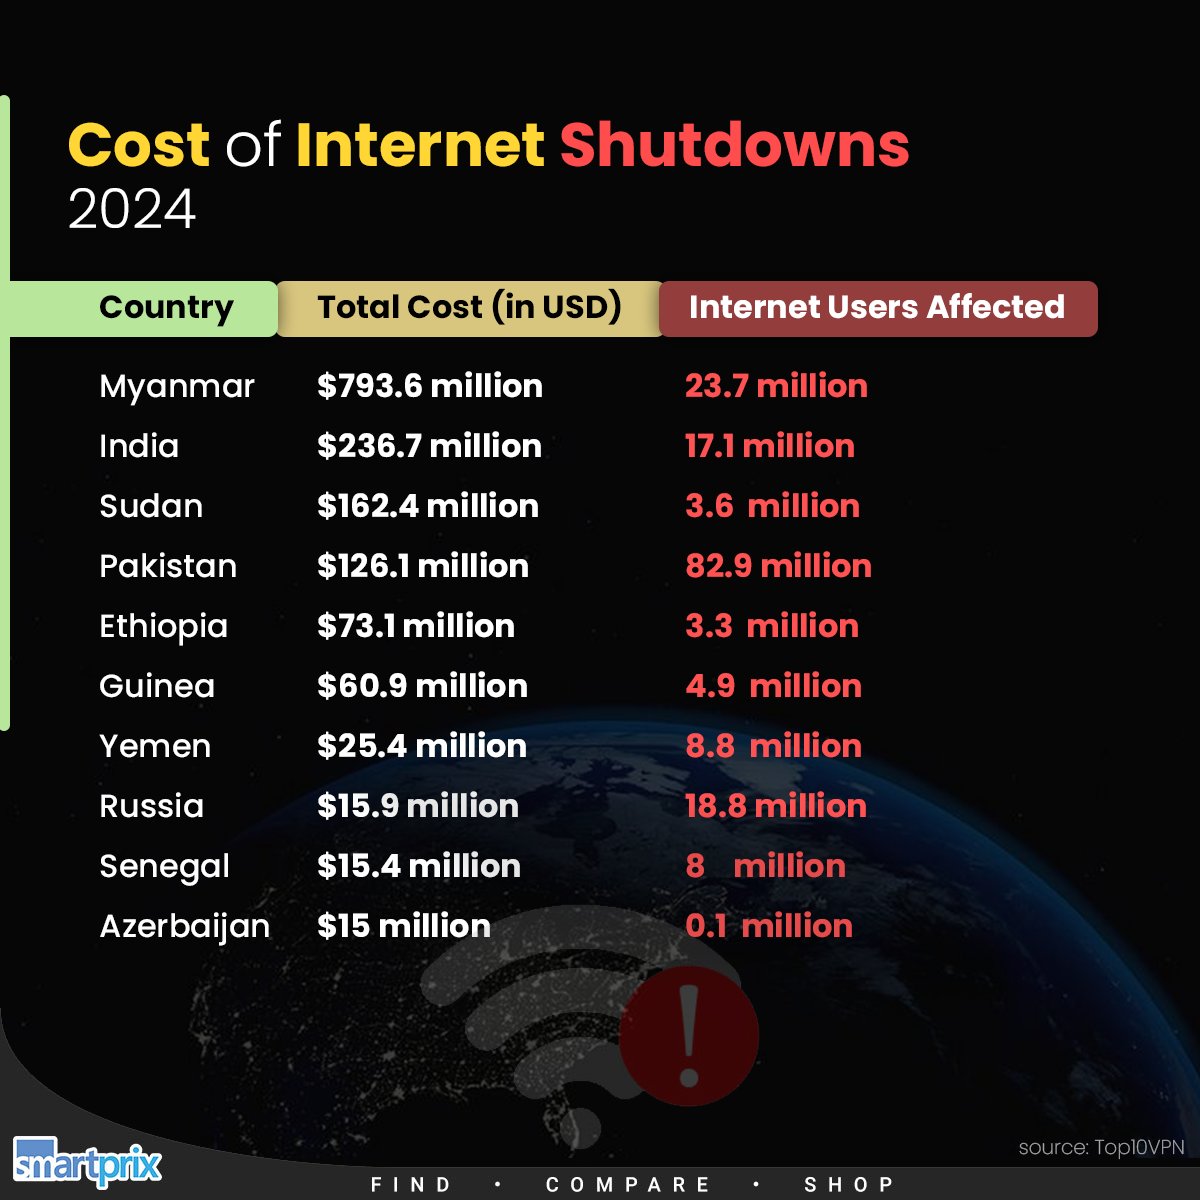 The cost of internet shutdowns in India this year so far: $236.7 million

#Internet #InternetShutdown #India